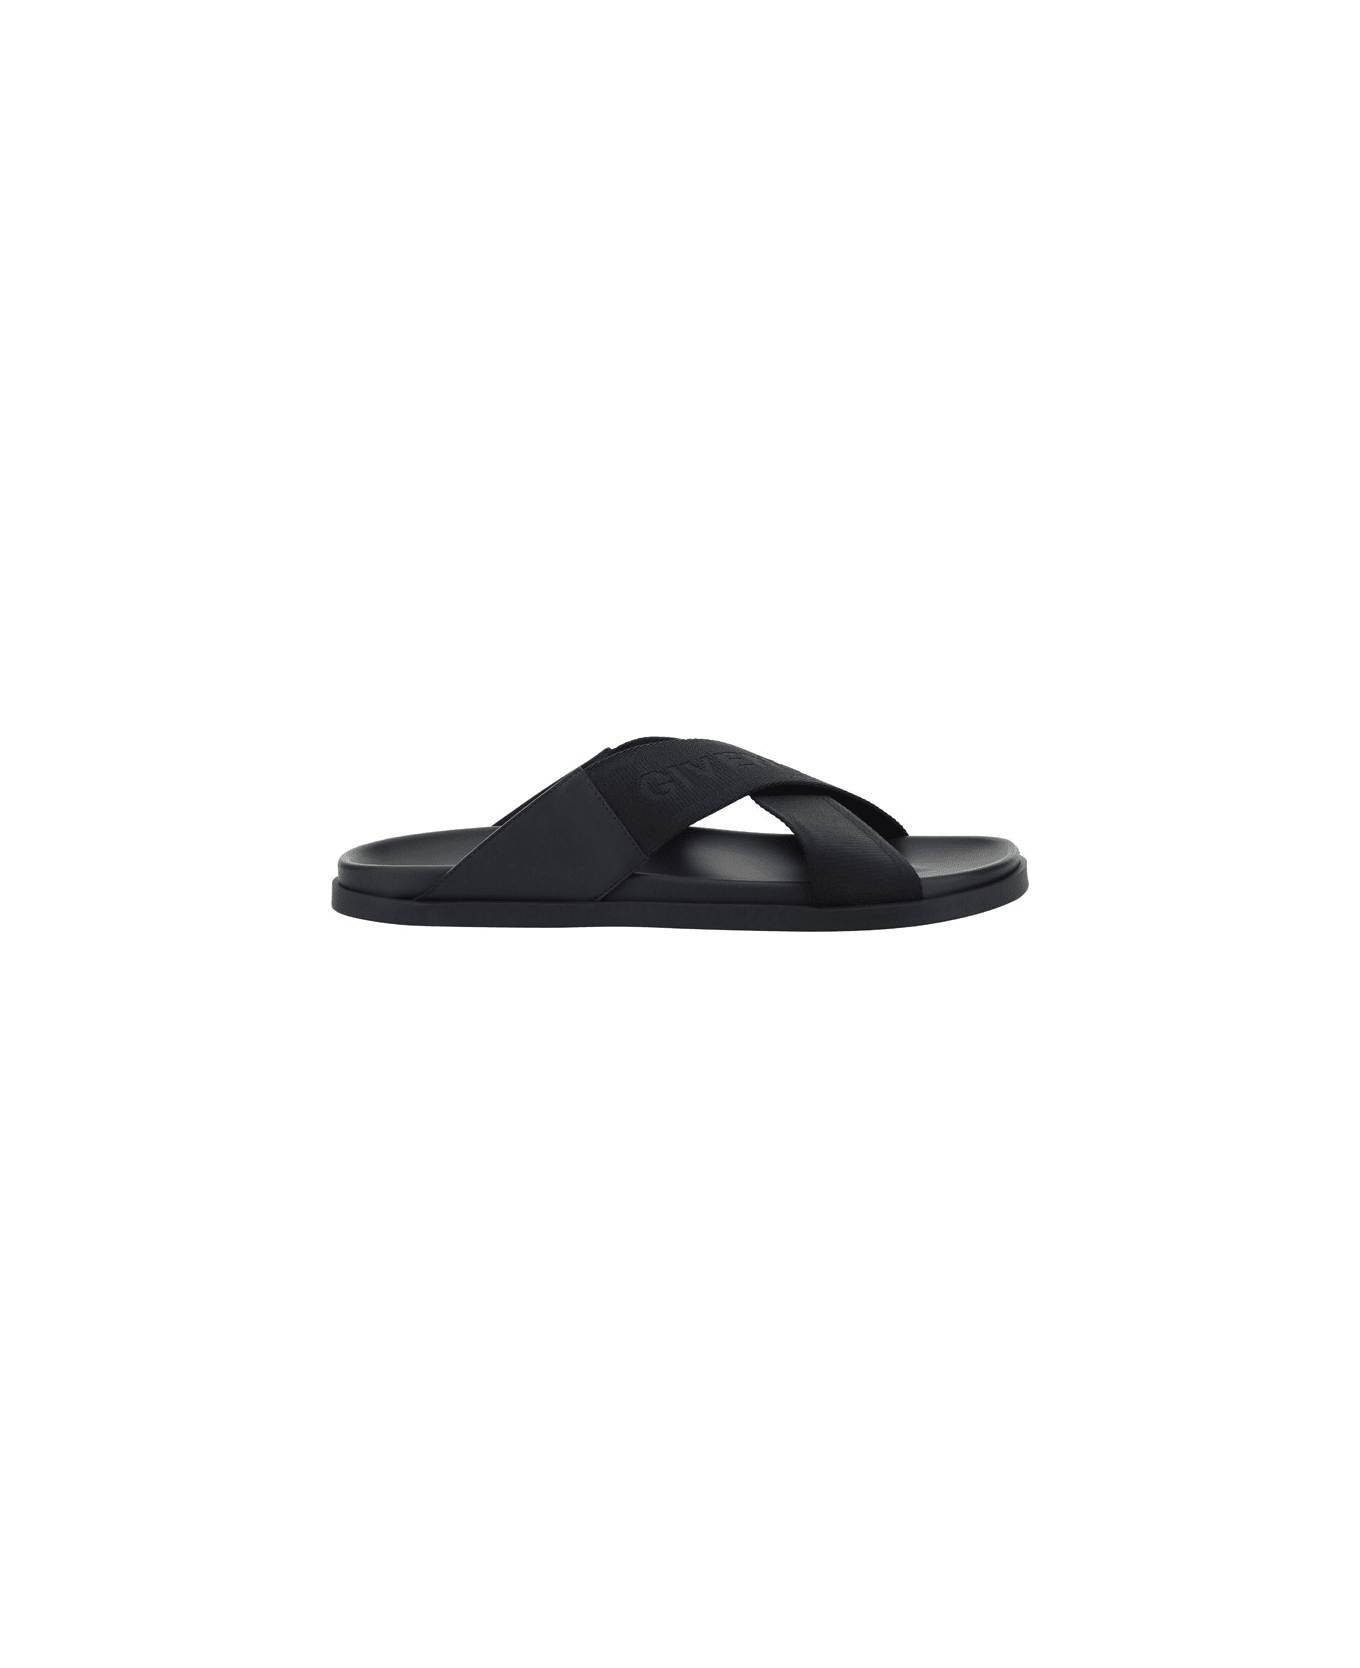 Givenchy Crossed Strap Sandals - Black その他各種シューズ